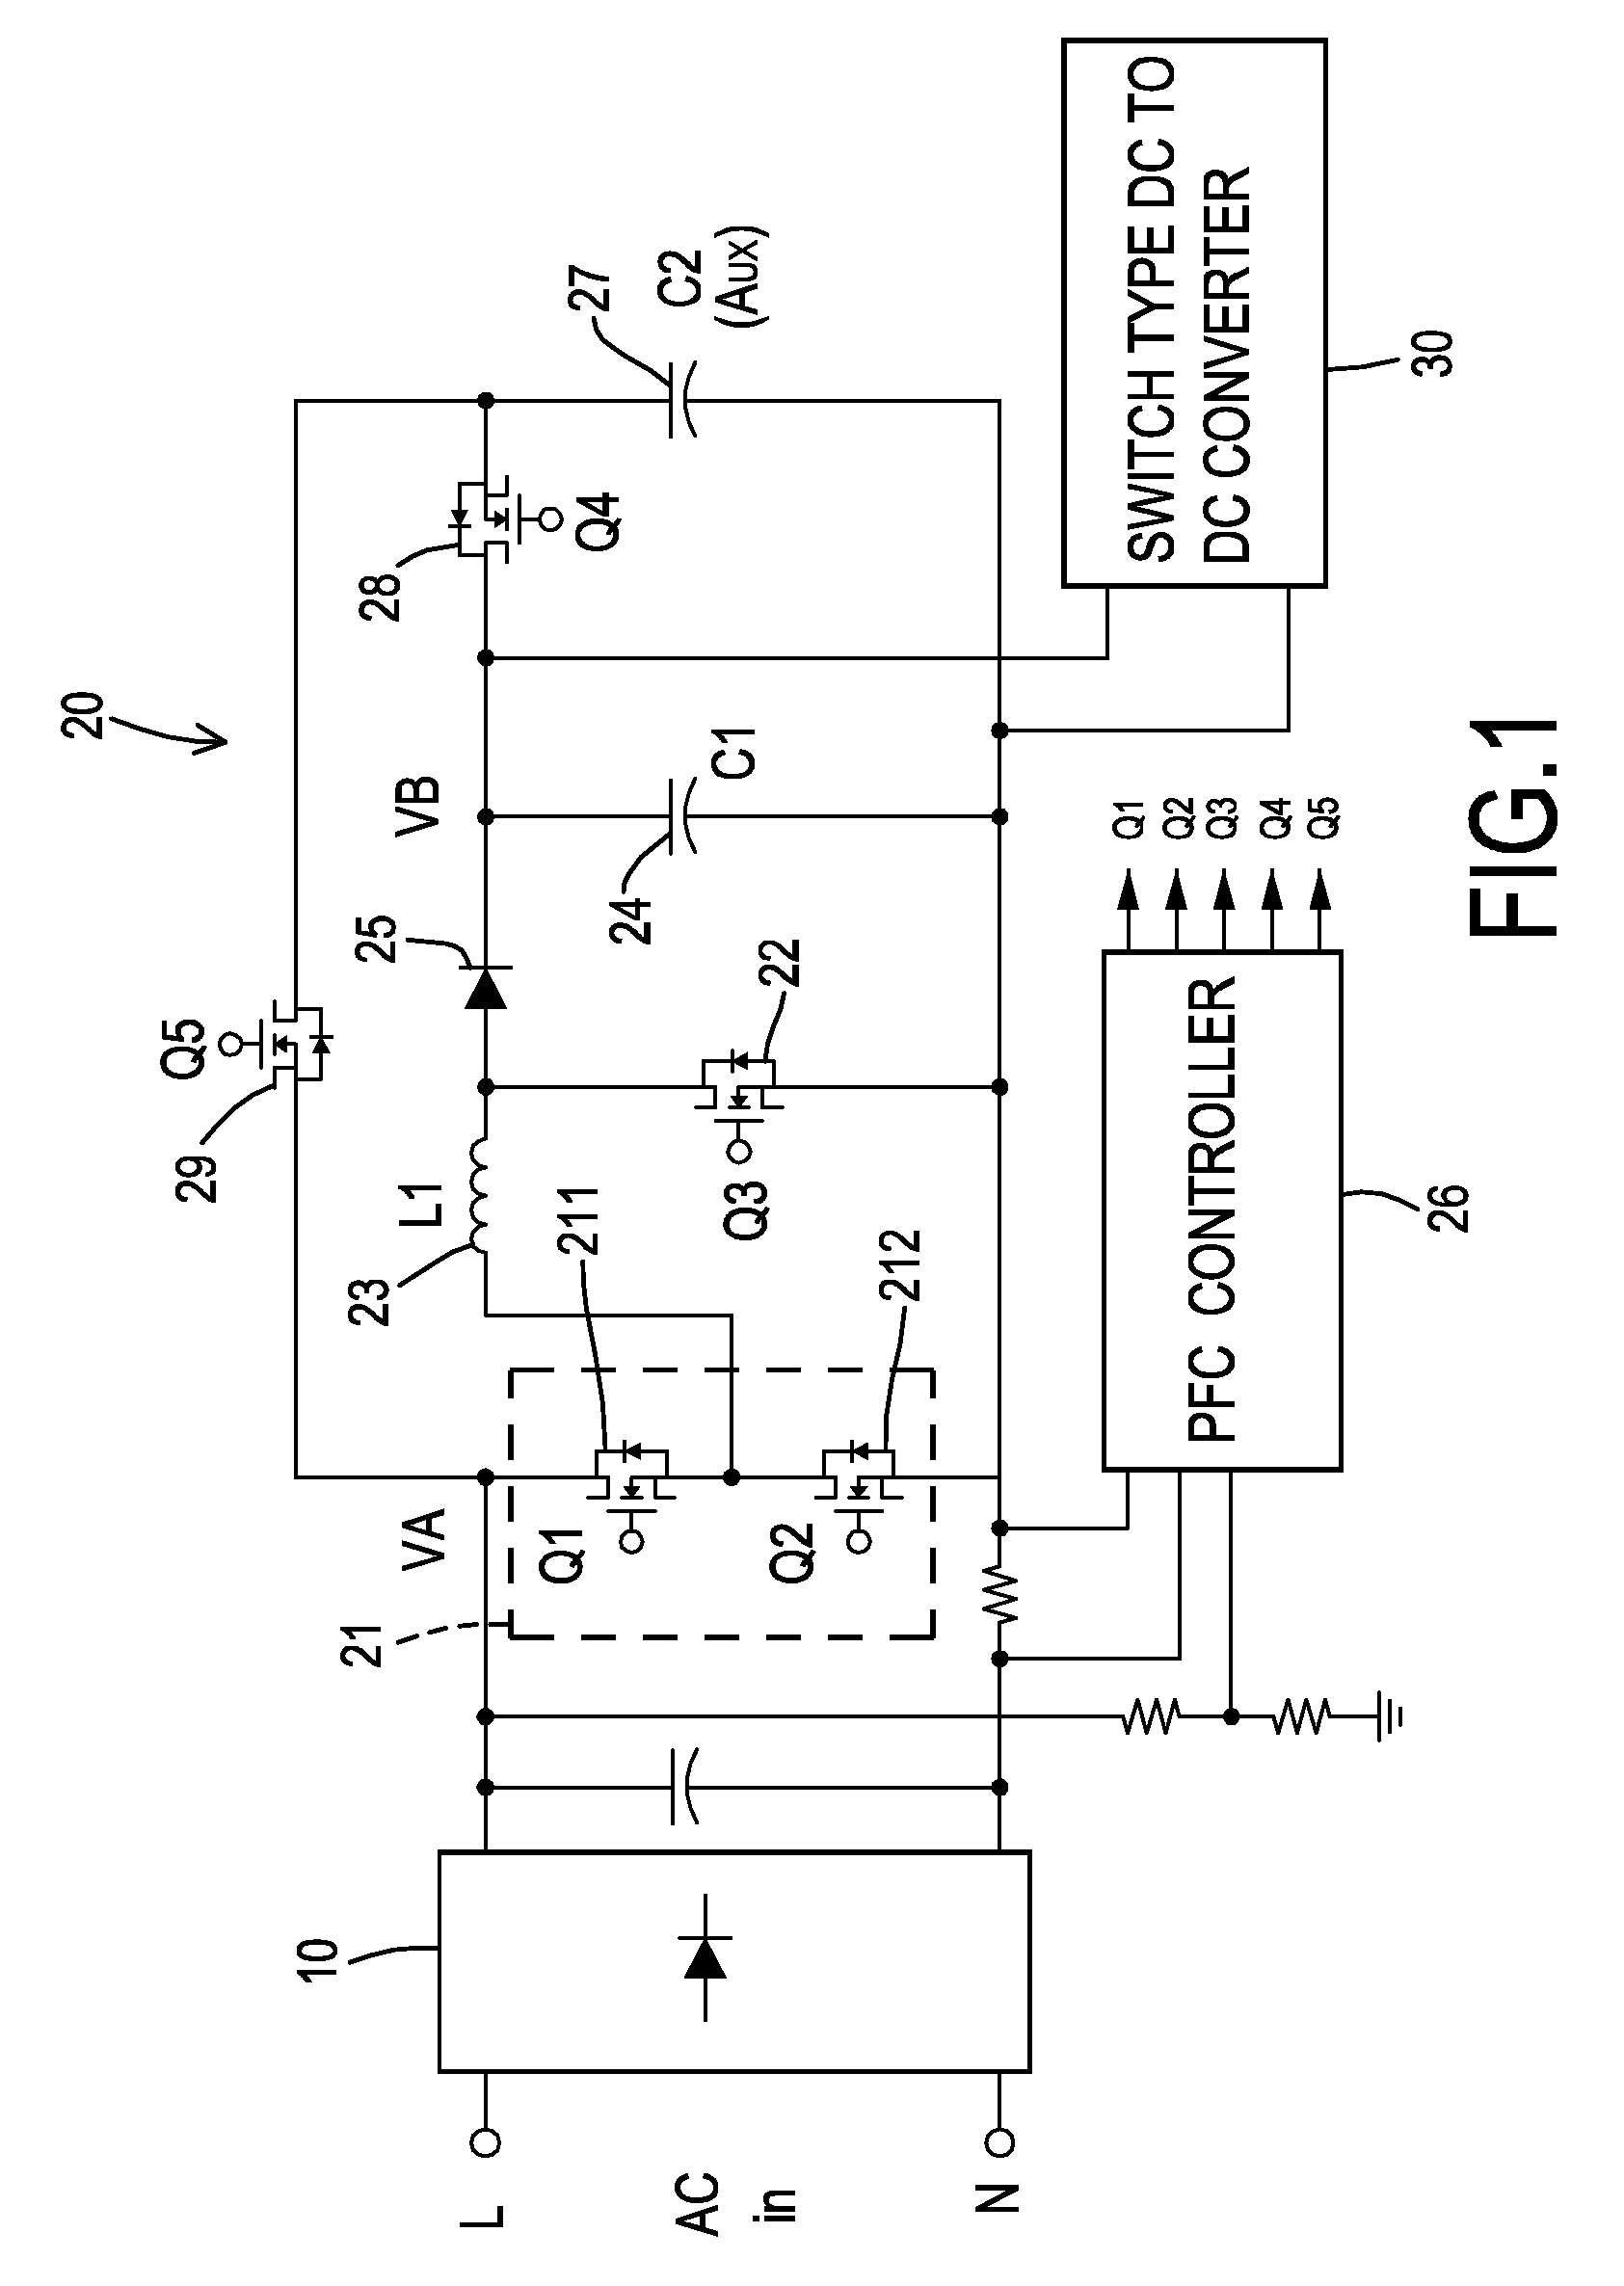 AC to DC power converter using an energy-storage capacitor for providing hold-up time function